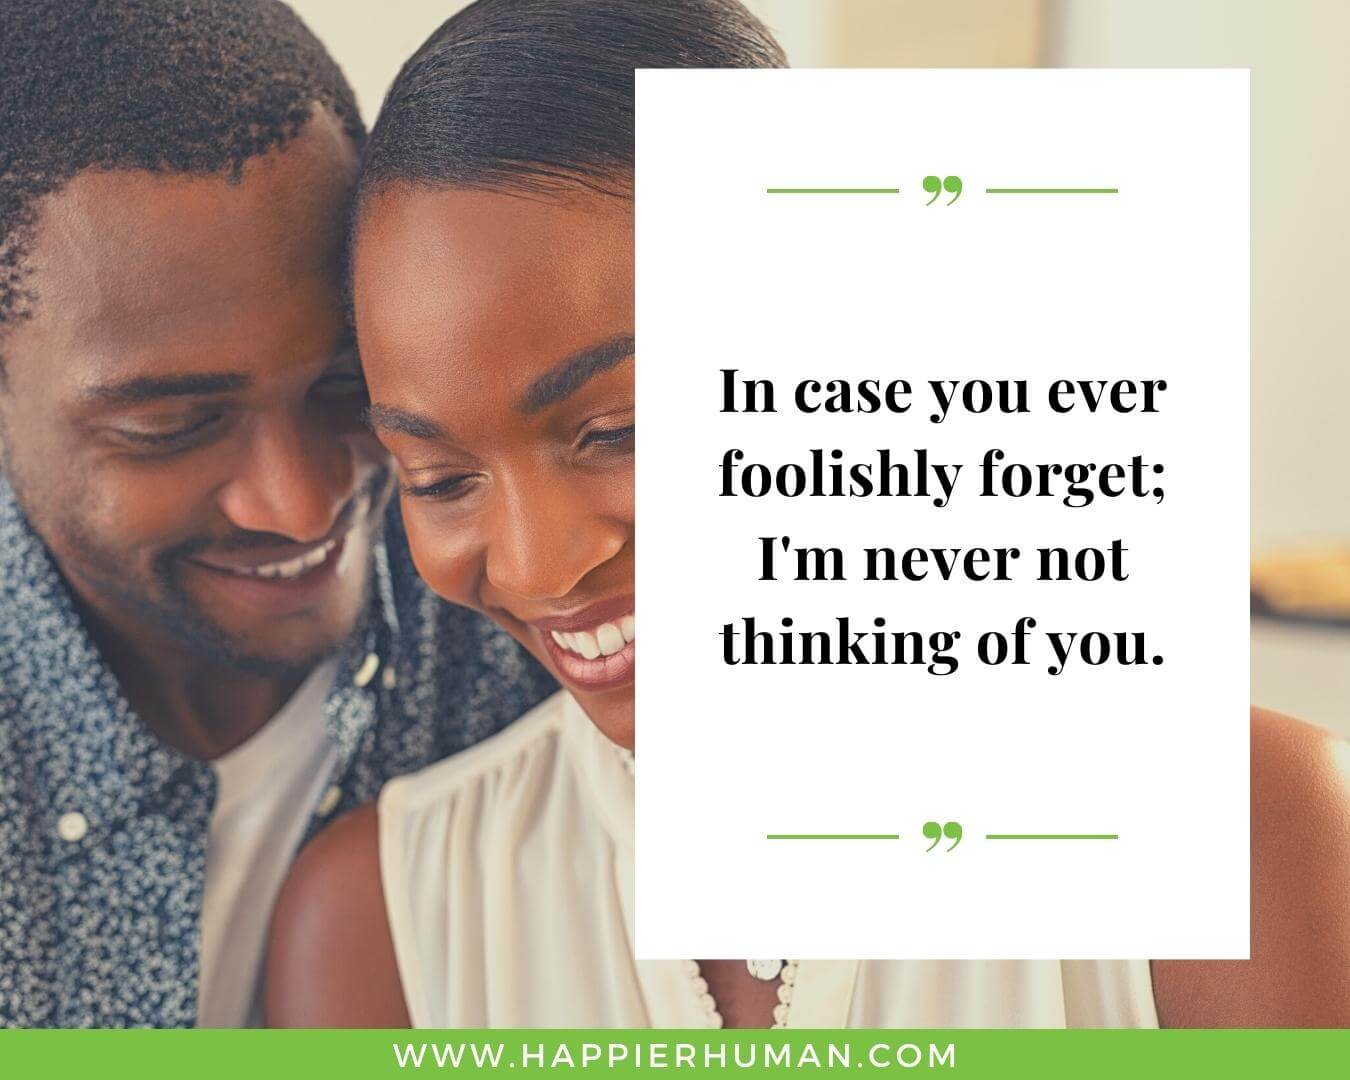 Unconditional Love Quotes for Her - “In case you ever foolishly forget; I'm never not thinking of you.”